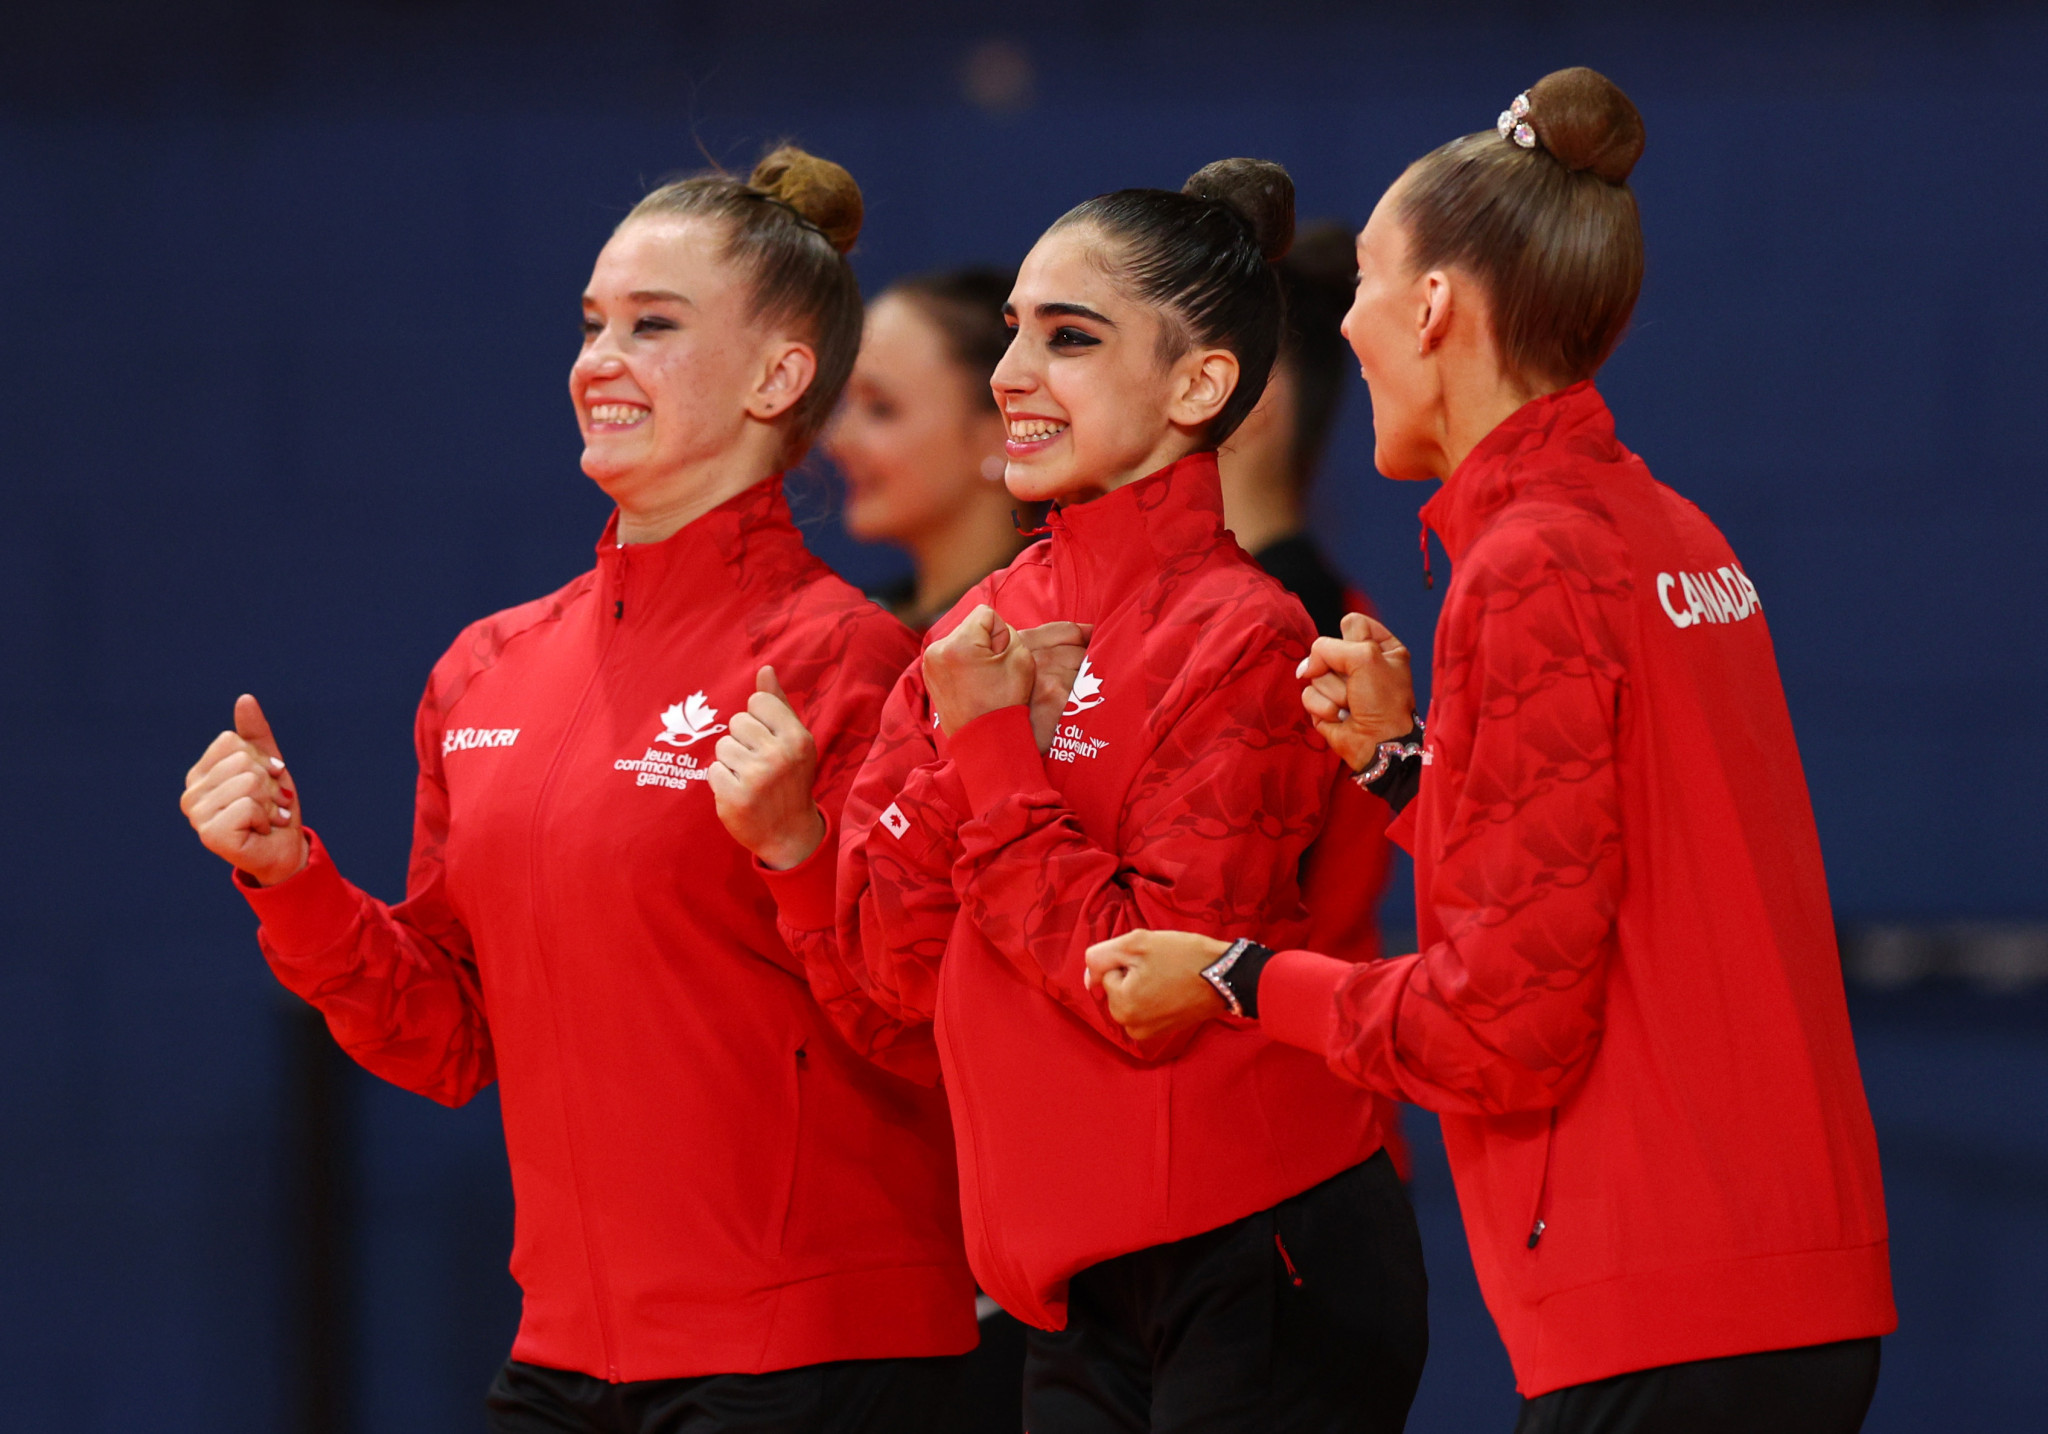 Canada victorious in rhythmic gymnastics team event as individual